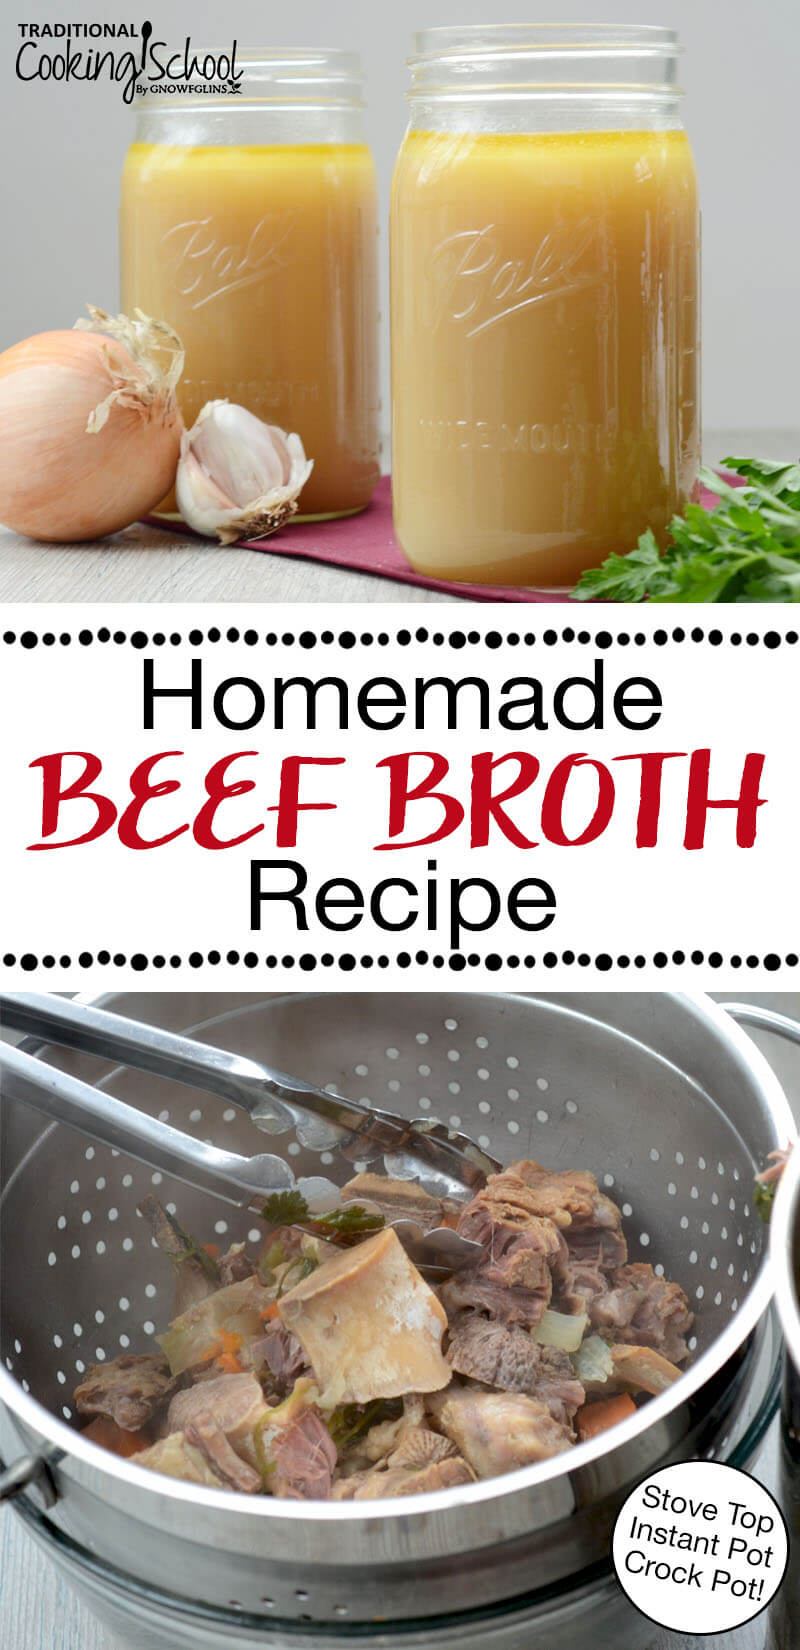 photo collage of making bone broth from beef bones, with text overlay: "Homemade Beef Broth Recipe (Stove Top, Instant Pot, Crock Pot!)"